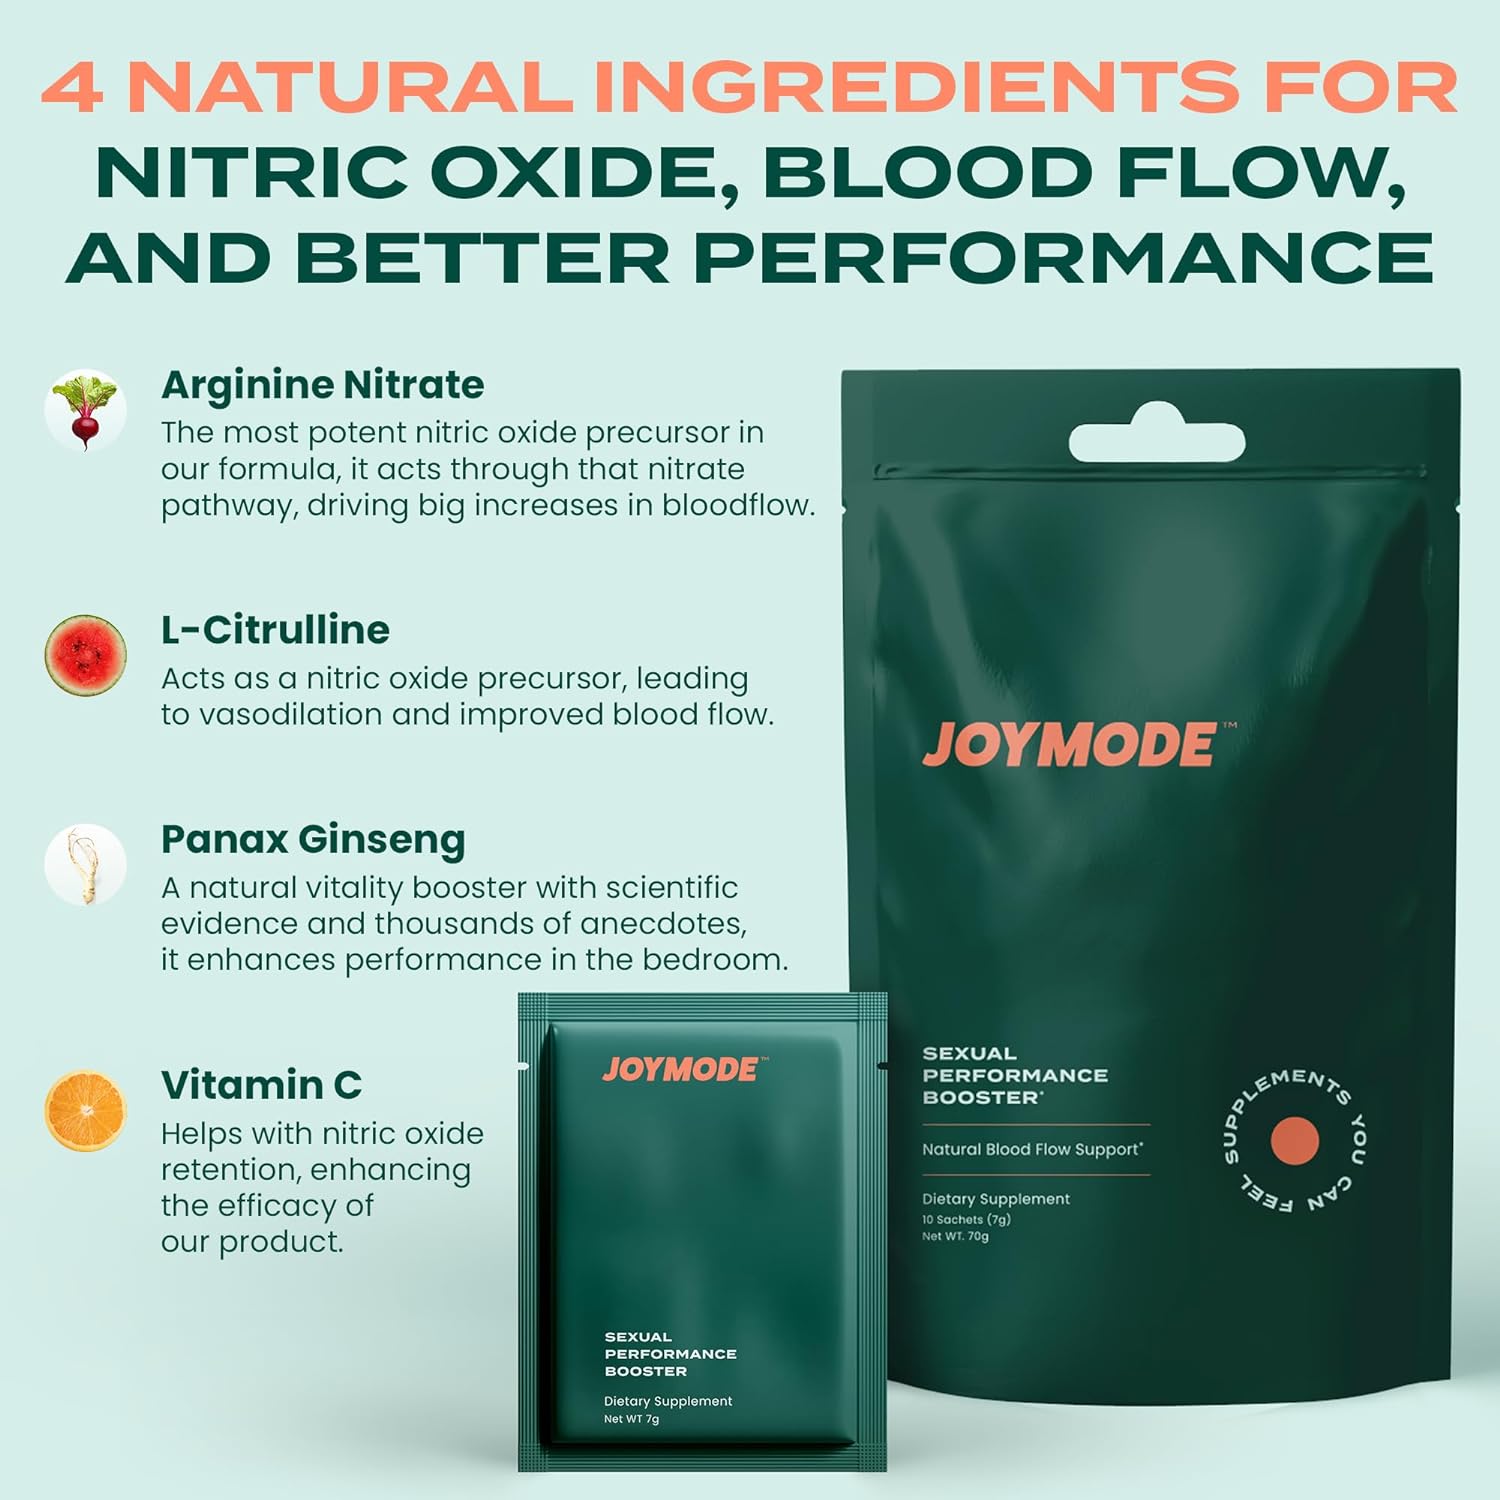 JOYMODE Performance Booster, Supports Blood Flow, Nitric Oxide, Erection Quality and Firmness, and Cardiovascular Health Made with Arginine Nitrate, L-Citrulline, and Ginseng